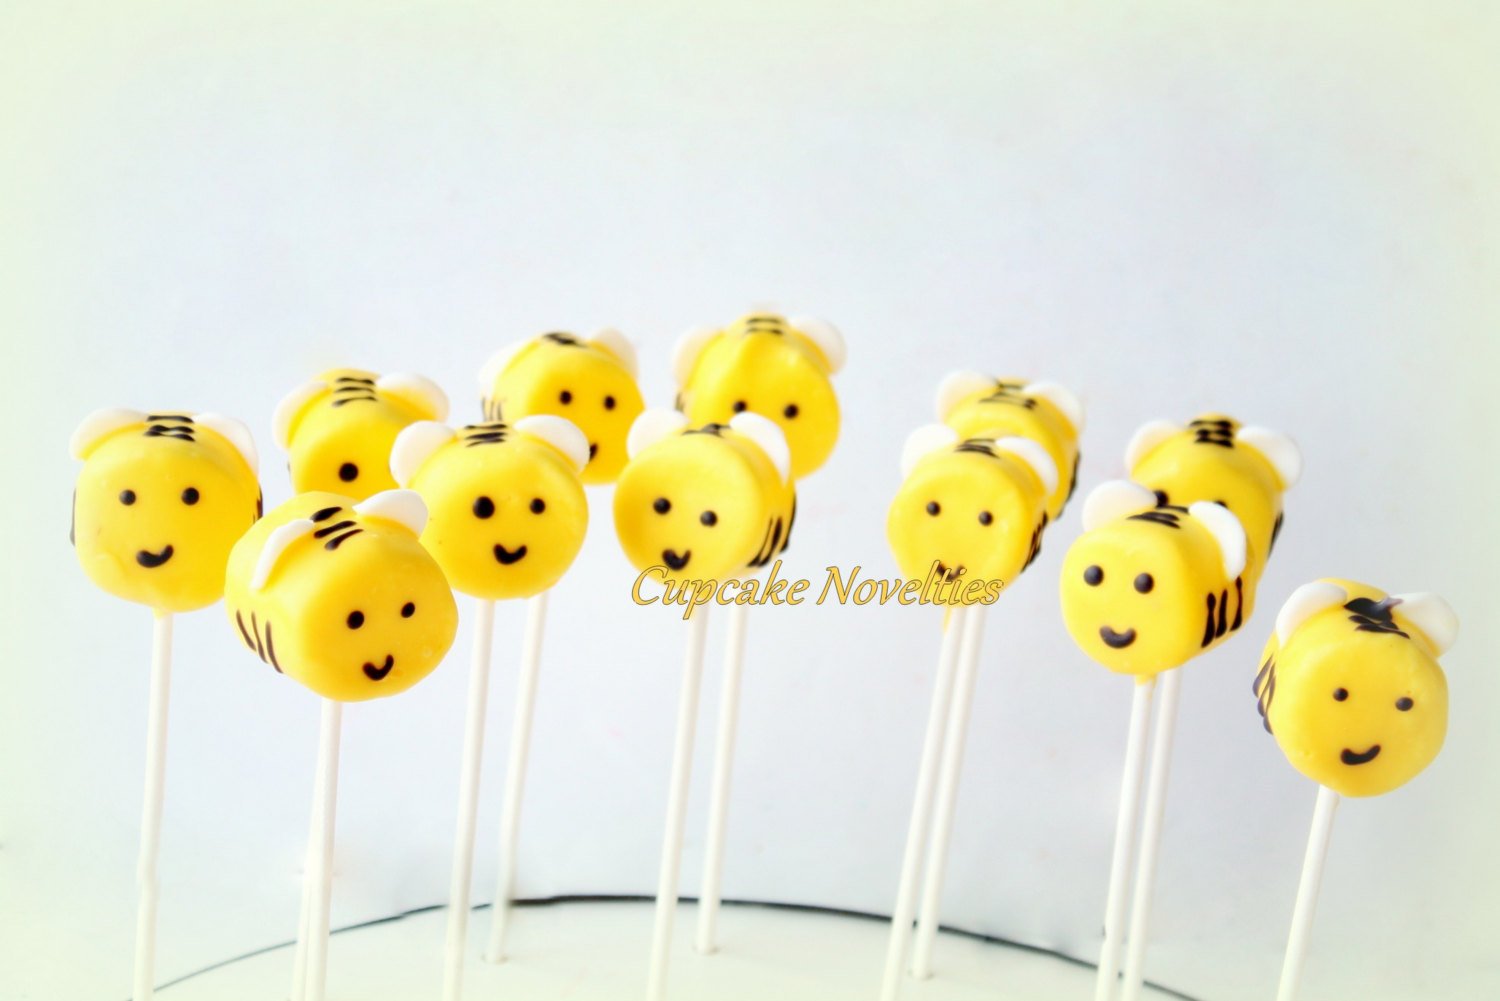 Bumble Bee Party, Bumble Bee Decorations, Bumble Bee Baby Shower, Bumble  Bee Birthday, Bumble Bees 